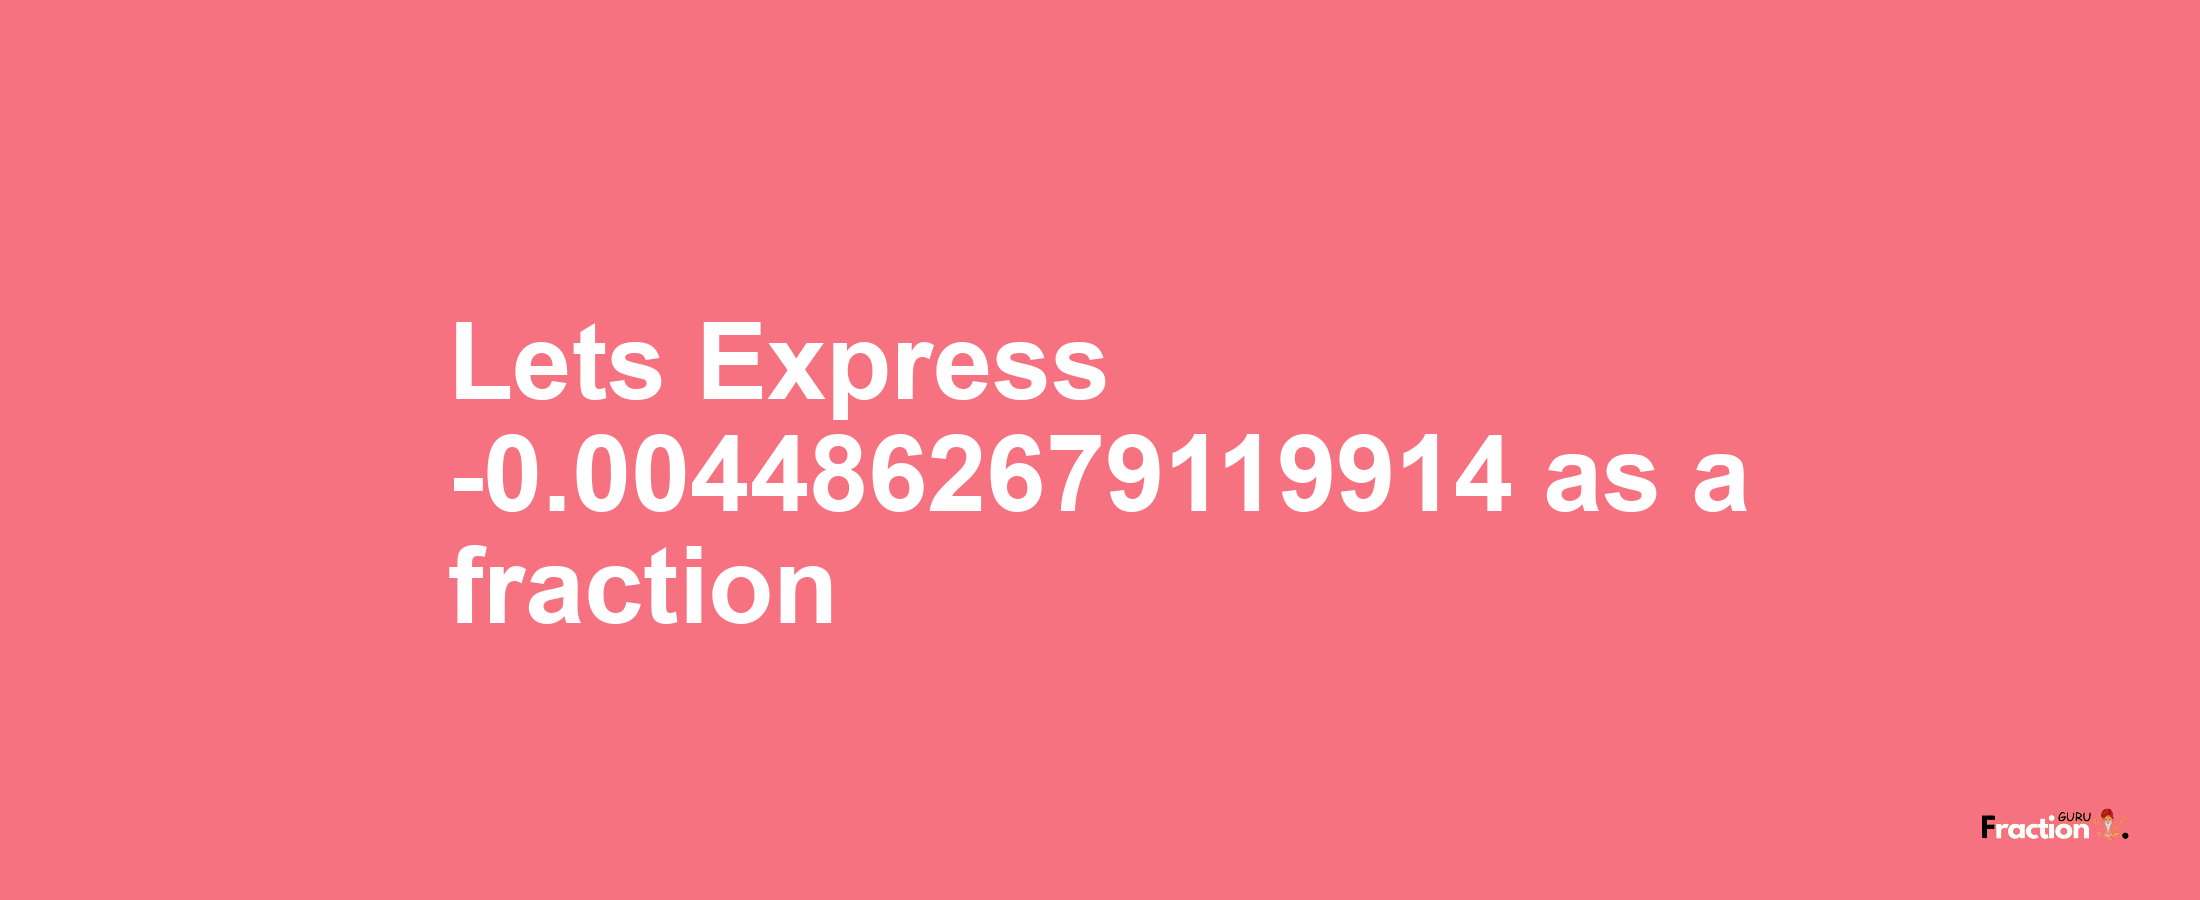 Lets Express -0.0044862679119914 as afraction